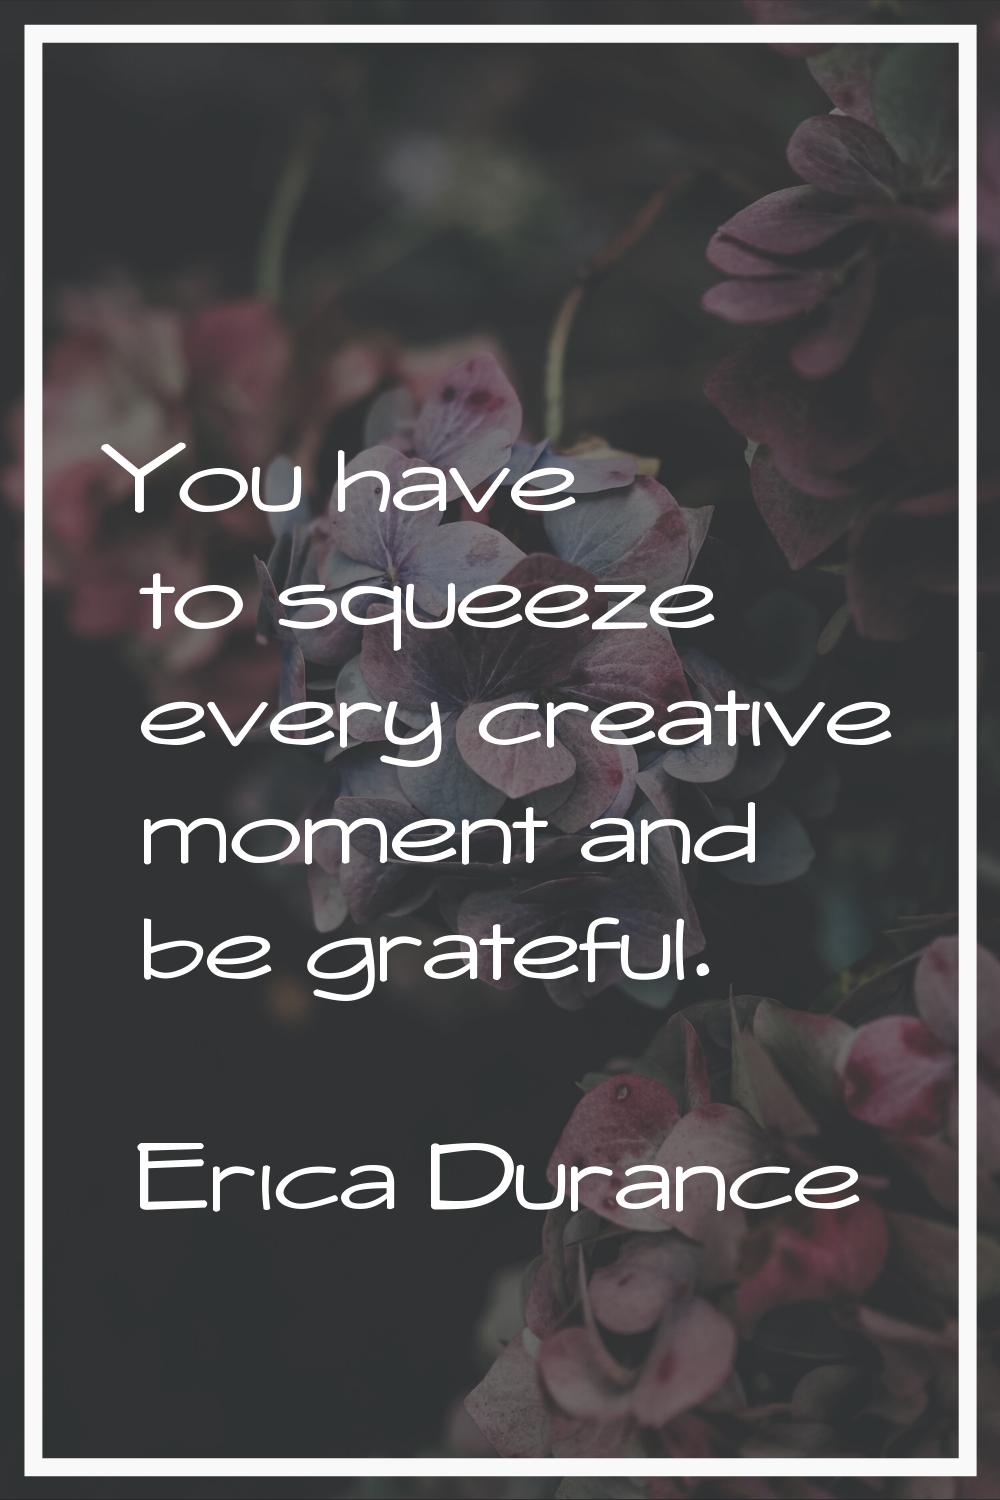 You have to squeeze every creative moment and be grateful.